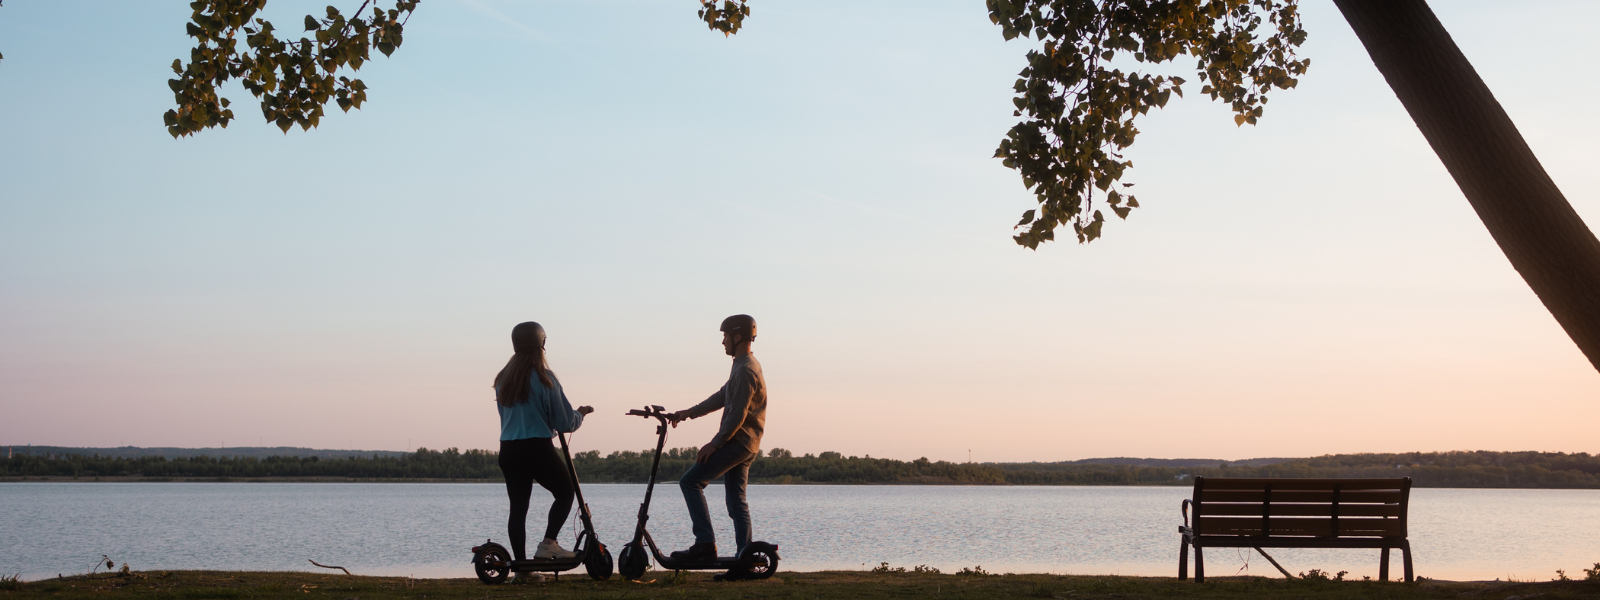 NAVEE V40 Electric scooter sunset